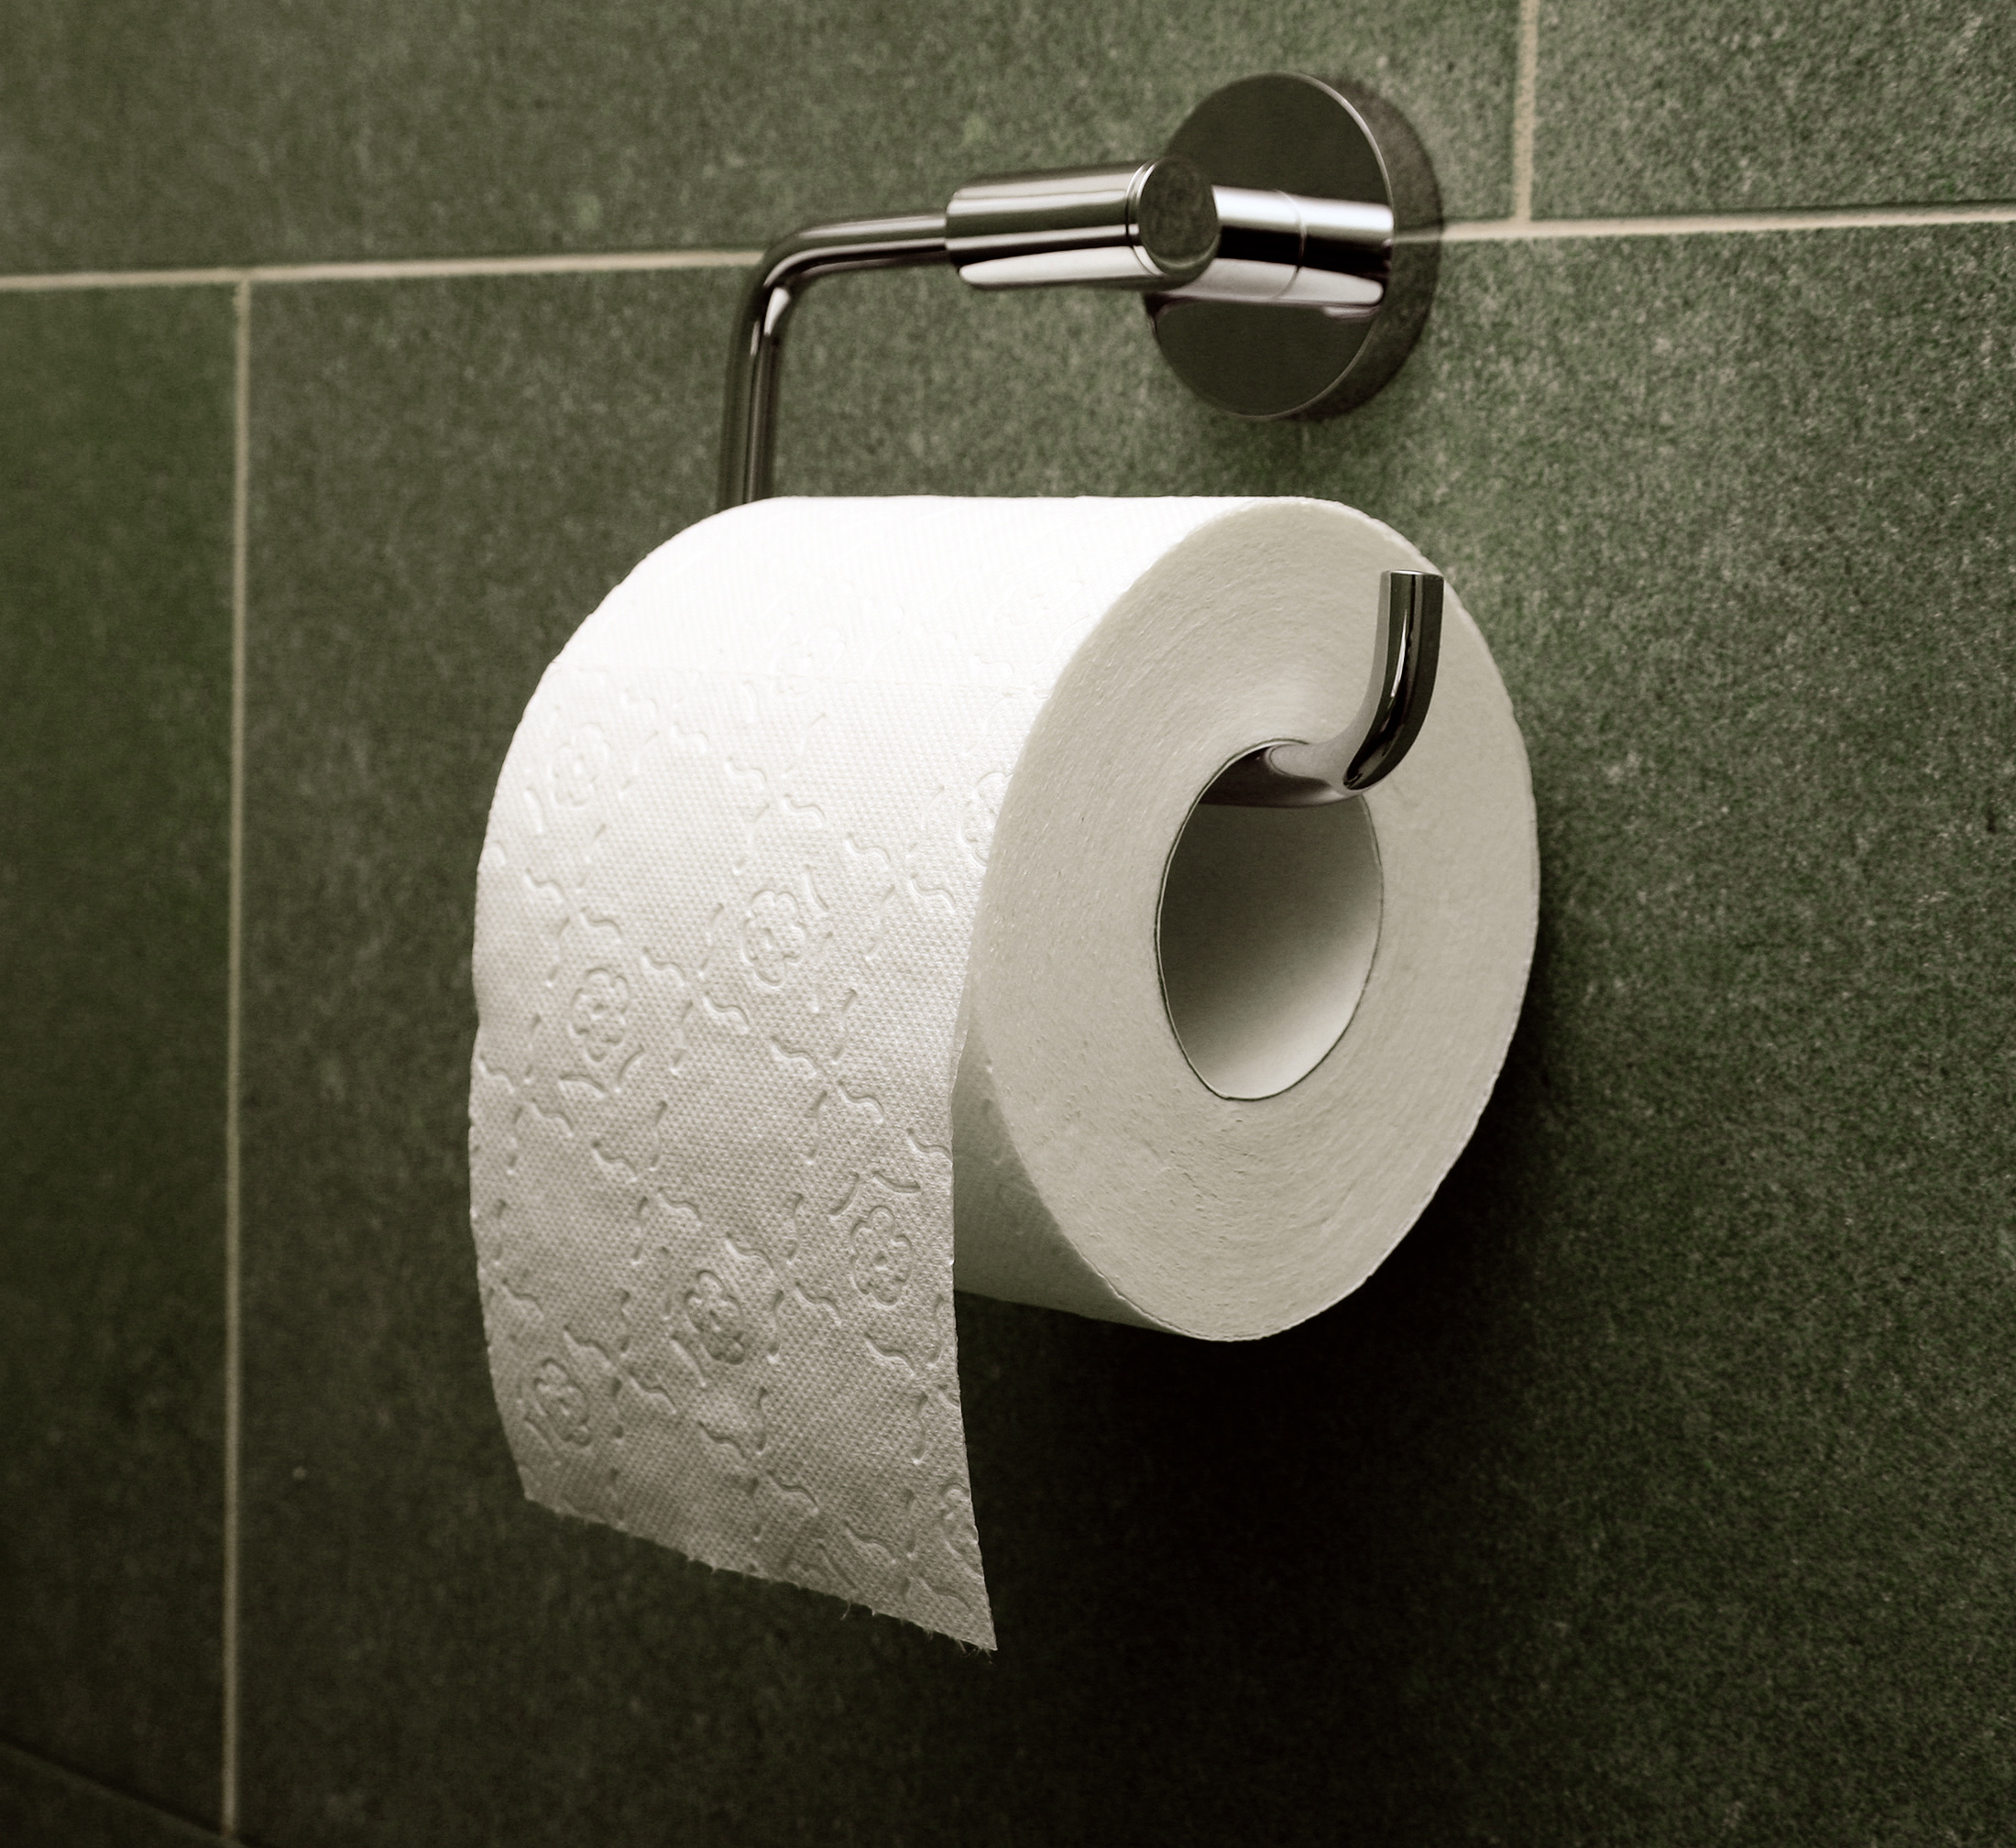 Toilet Papers are Also Responsible for Clogging in the Toilet